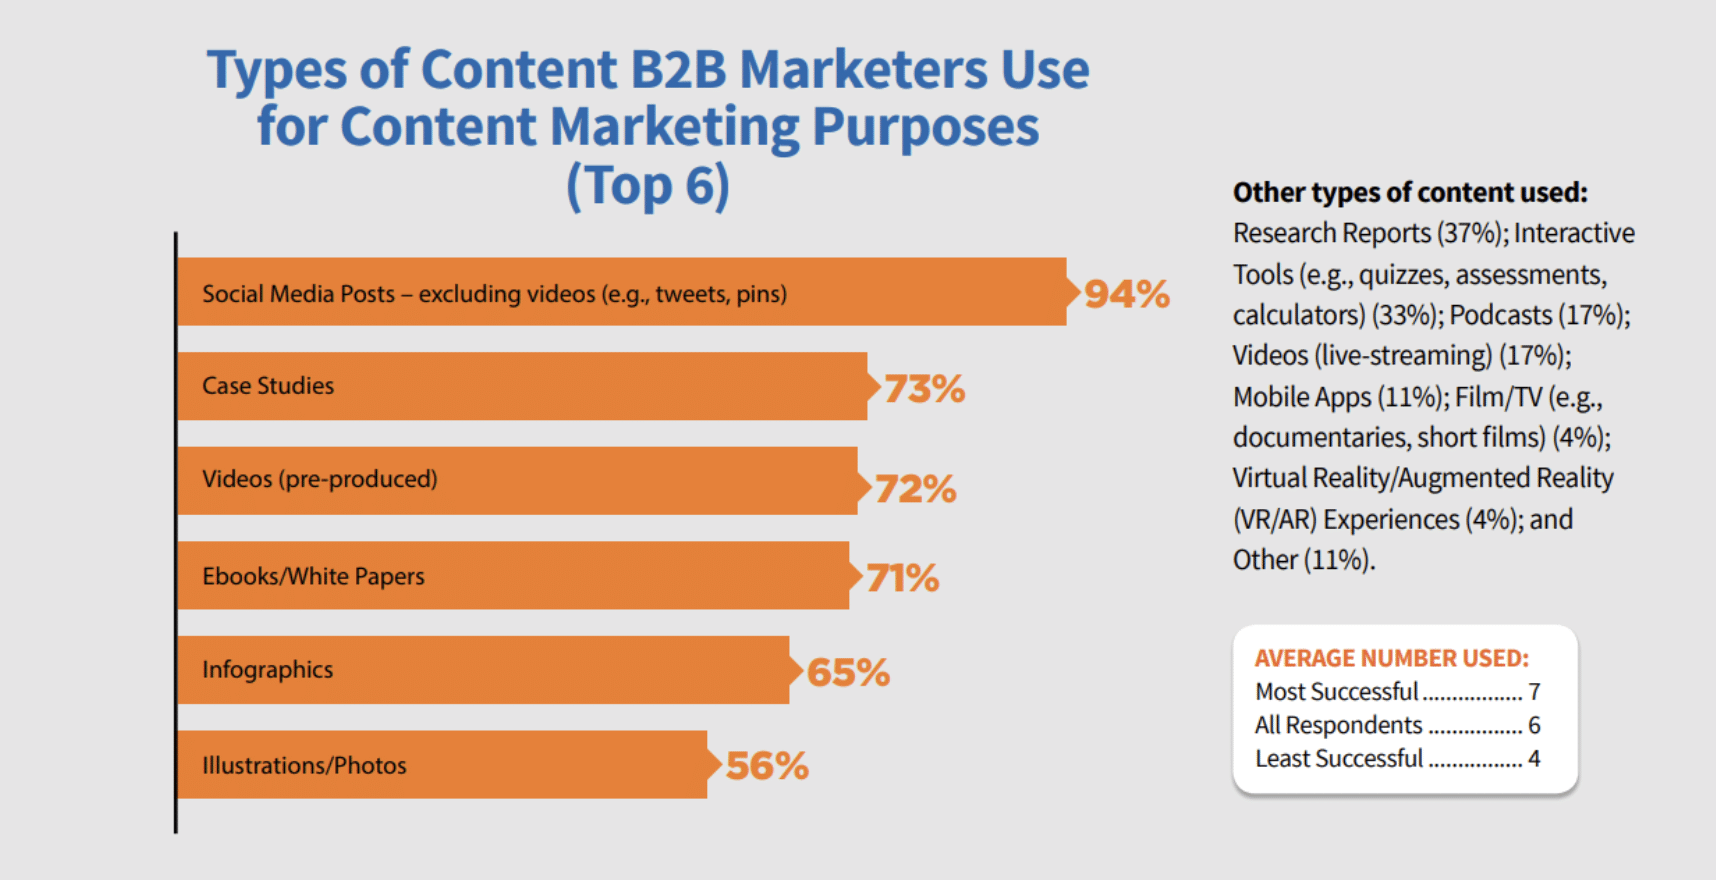 bar graph shows top types of content used for b2b content marketing